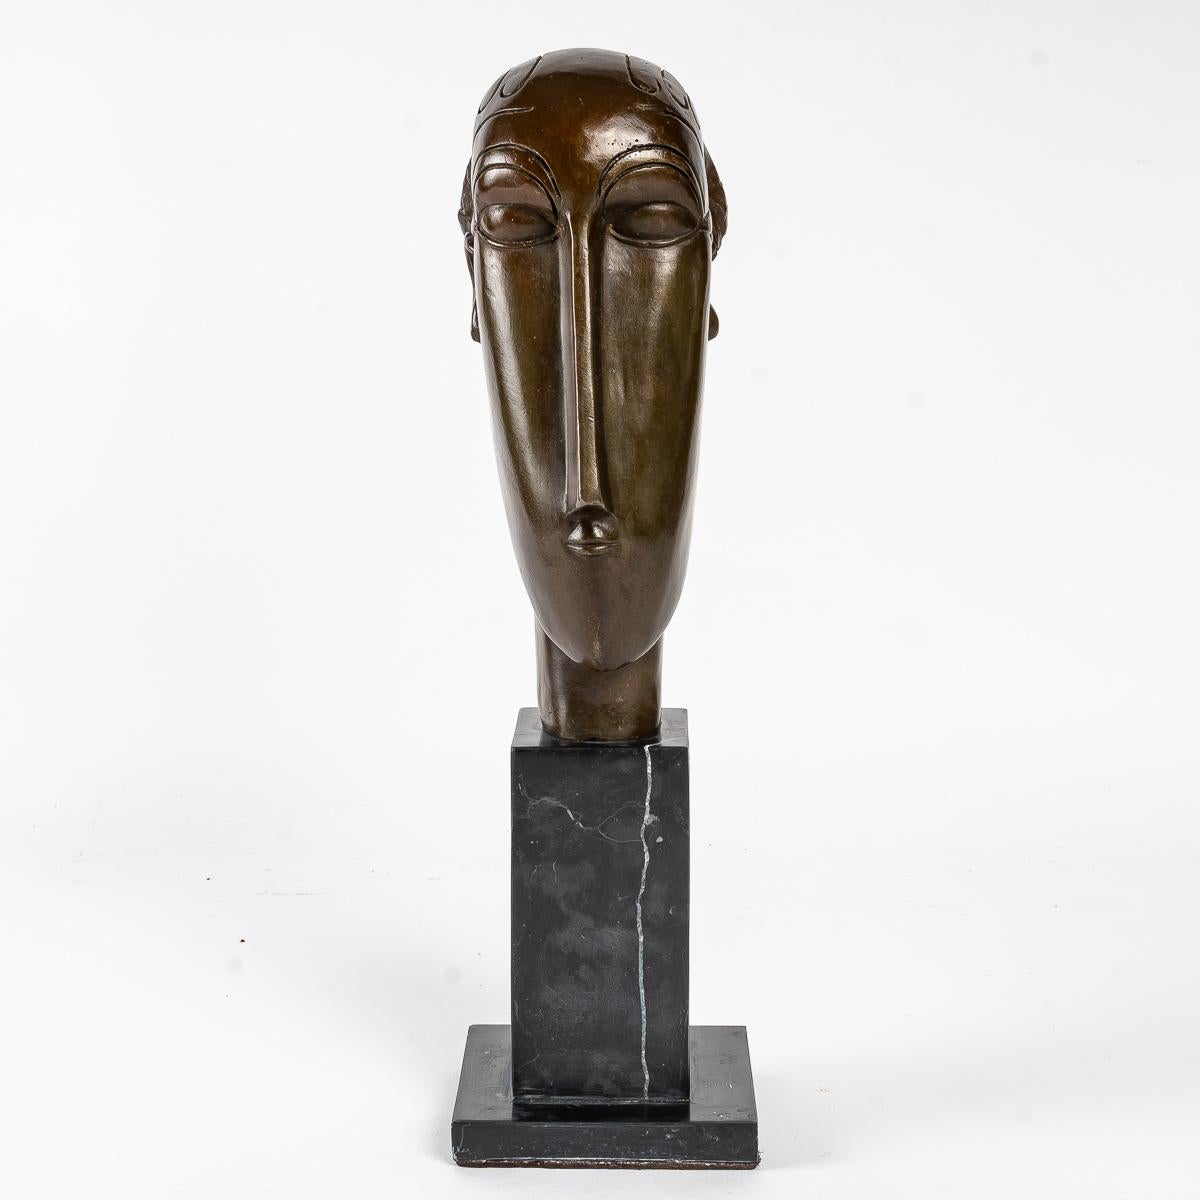 Sculpture of a woman after Modigliani
Sculpture in patinated bronze and marble, copy of Modigliani from the 20th century.
Measures: H: 36 cm, W: 10 cm, D: 10 cm.